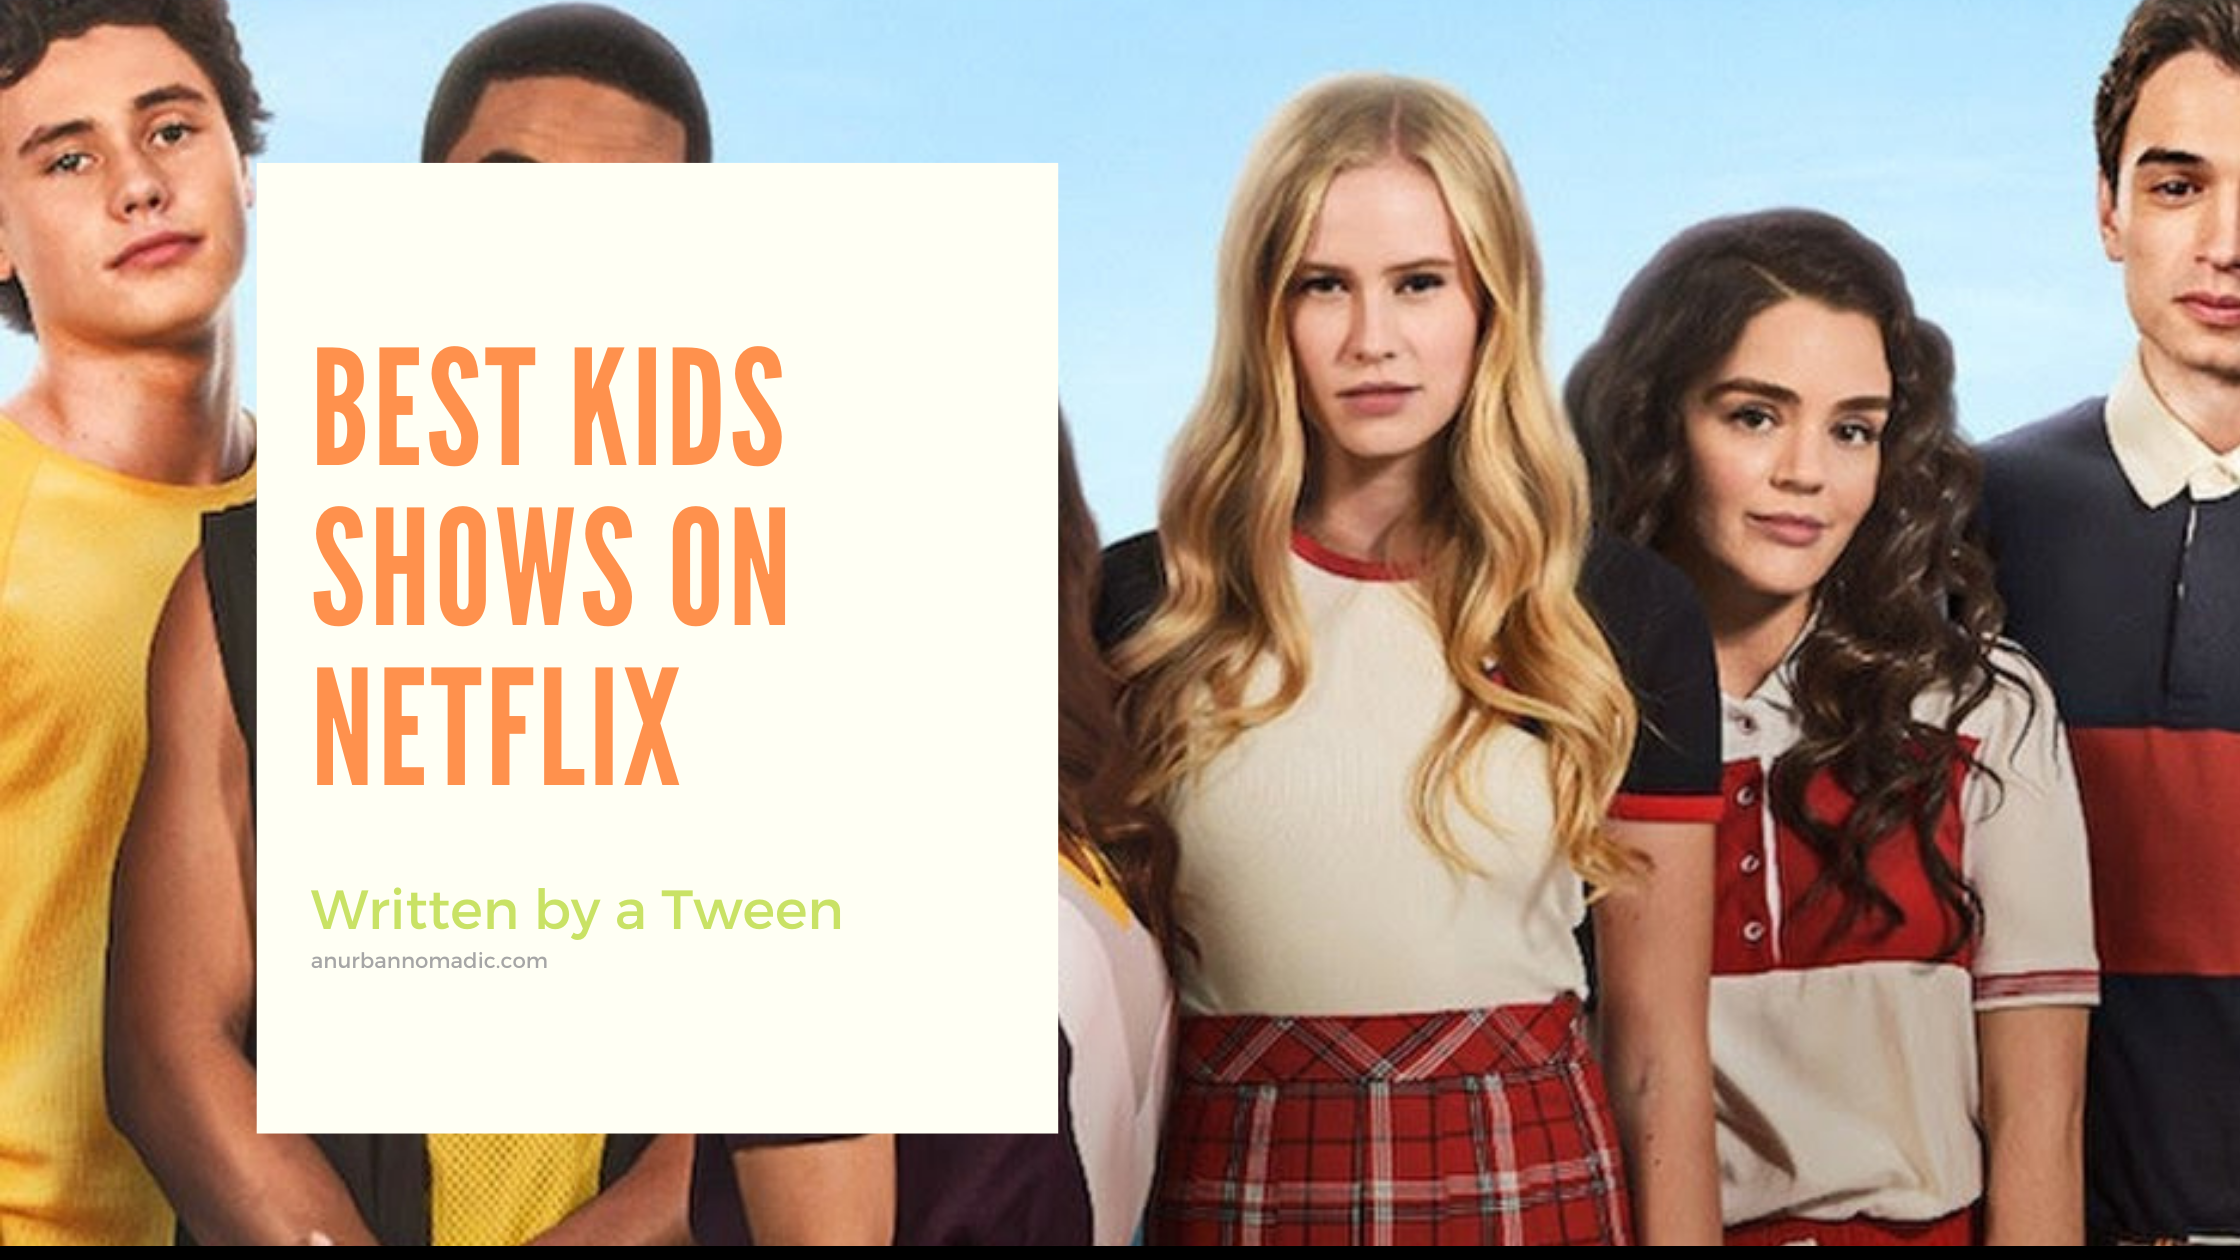 Best shows for Kids on Netflix in 2020